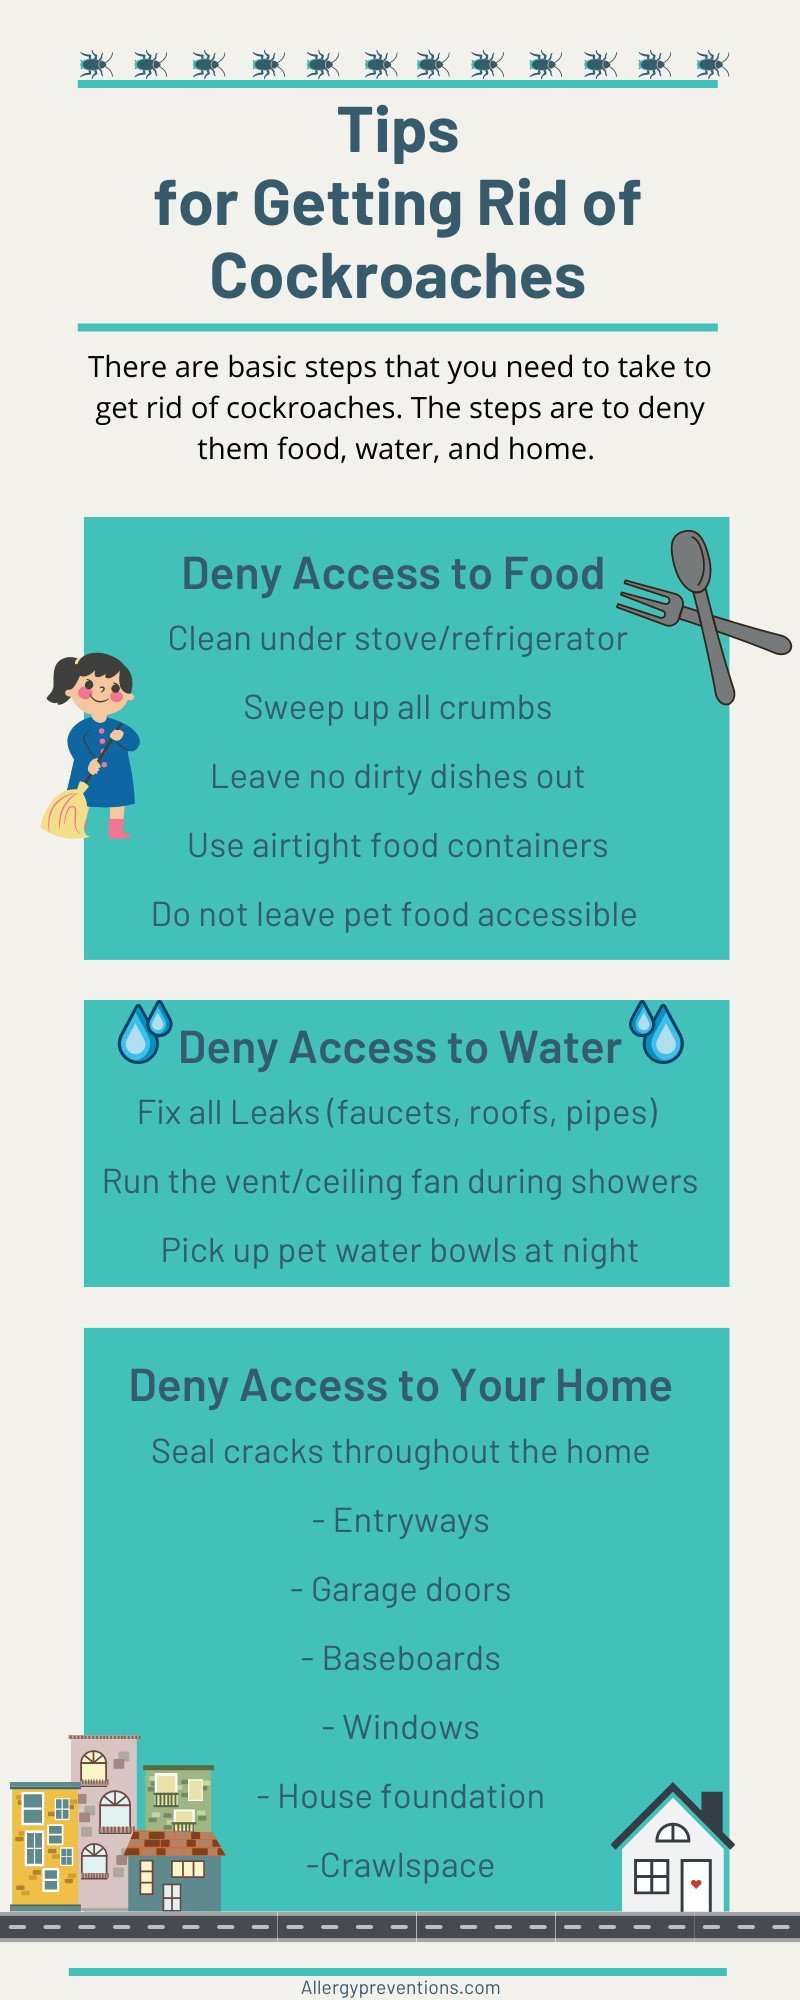 tips-for-getting-rid-of-cockroaches-infographic-deny access to food, deny access to water, deny access to your home